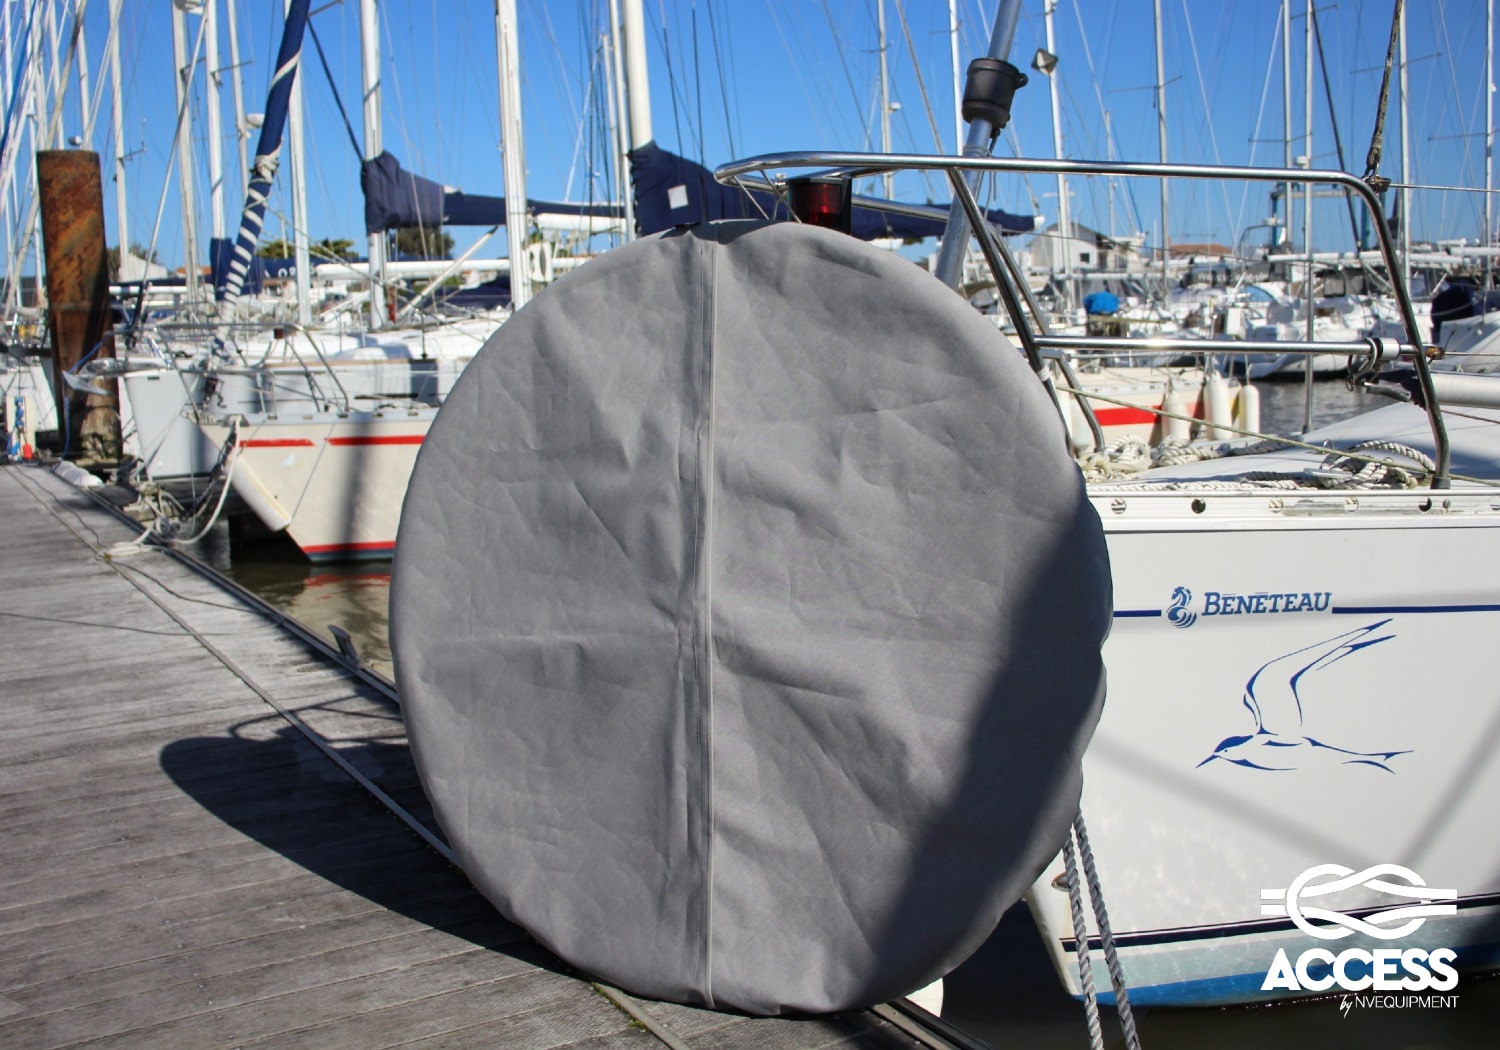 Steering wheel protection for sailboats NV equipment